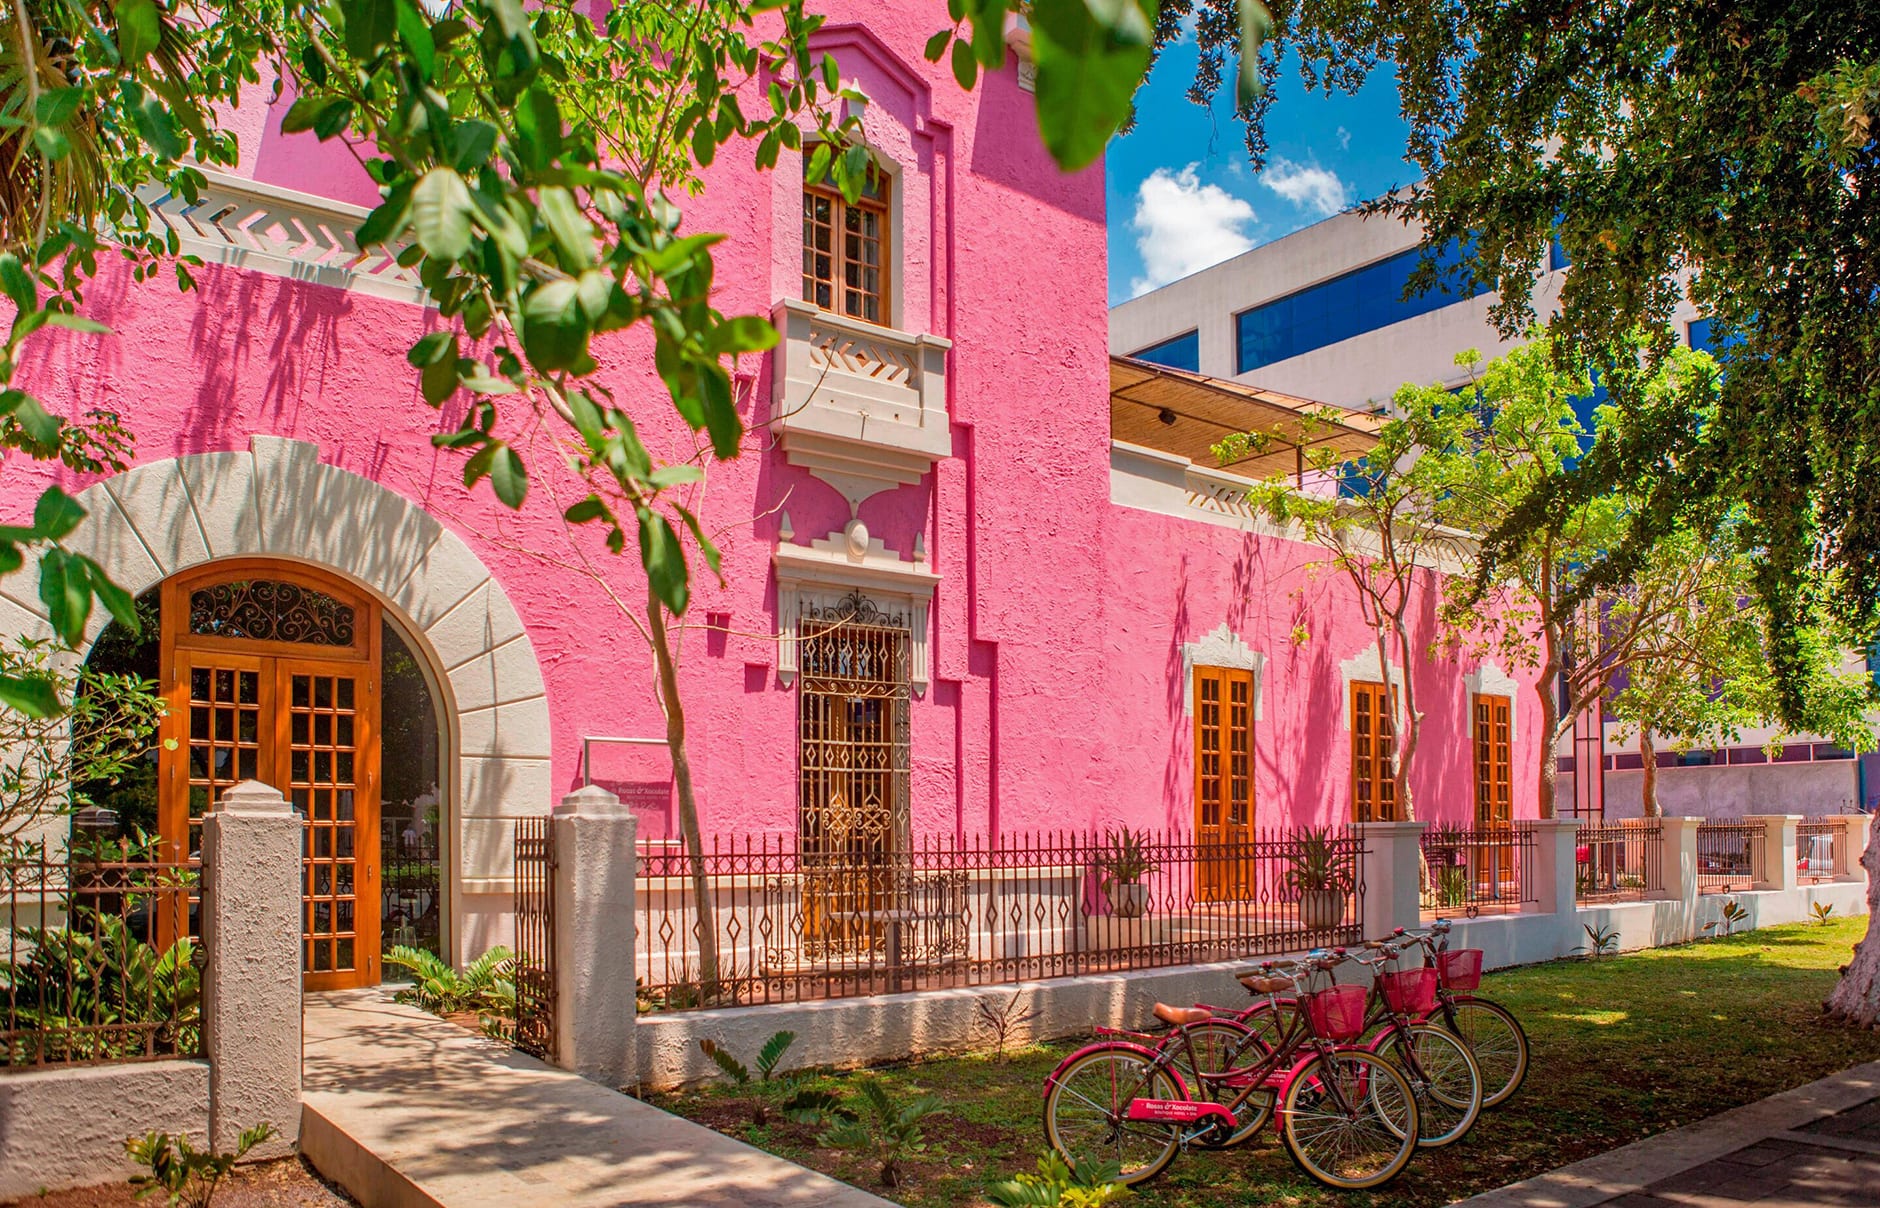 Rosas & Xocolate Boutique Hotel+Spa, Merida, Mexico. Luxury Hotel Review by TravelPlusStyle. Photo © Rosas & Xocolate